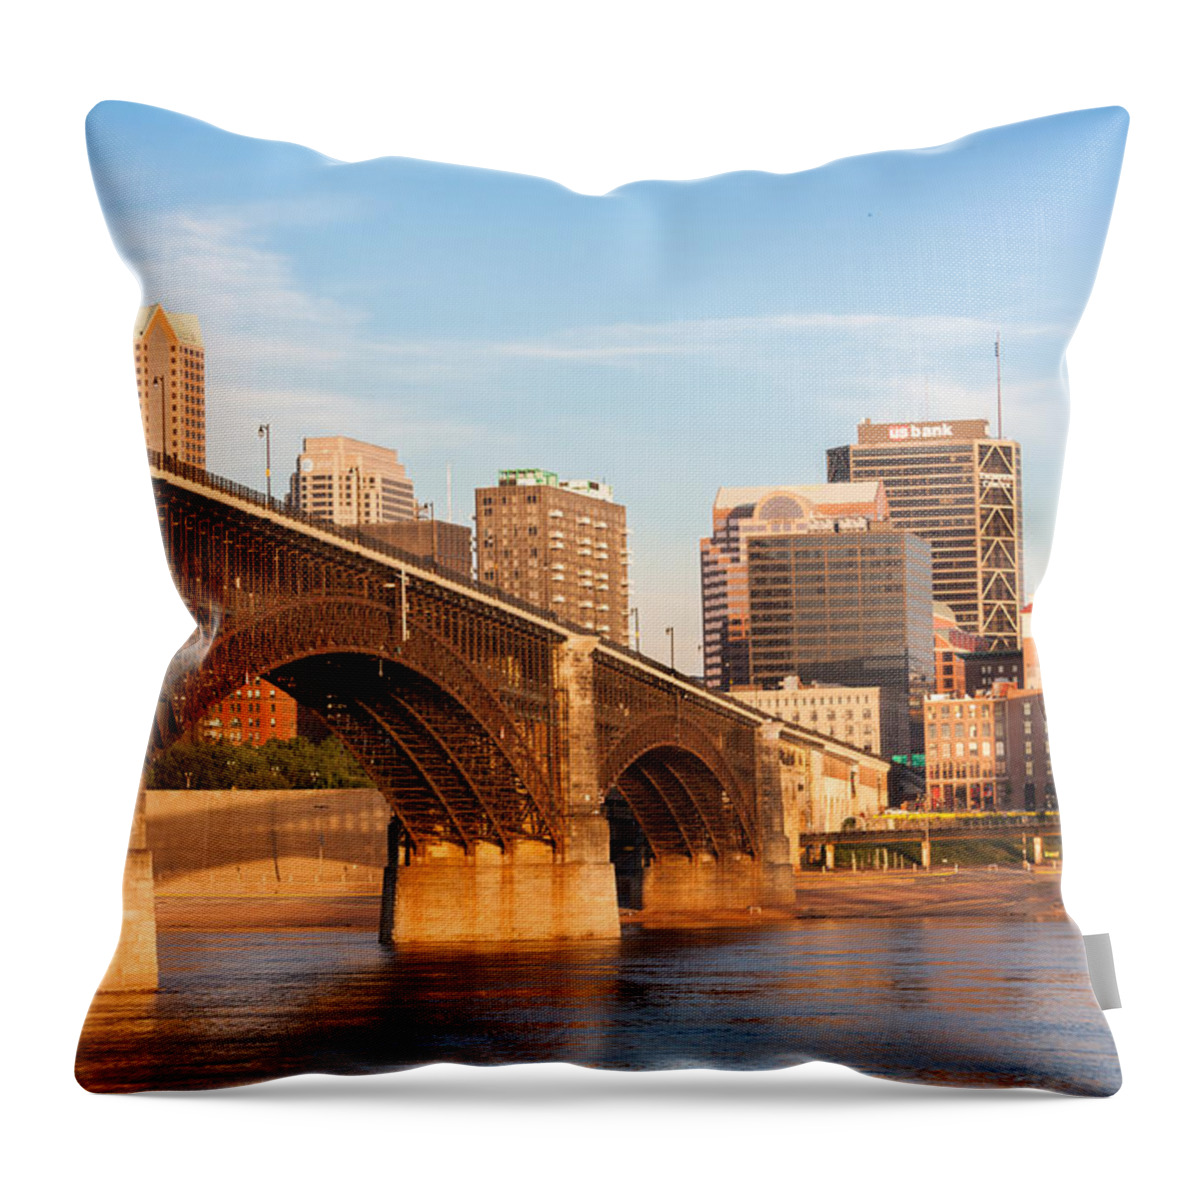 Arches Throw Pillow featuring the photograph Eads Bridge at St Louis by Semmick Photo